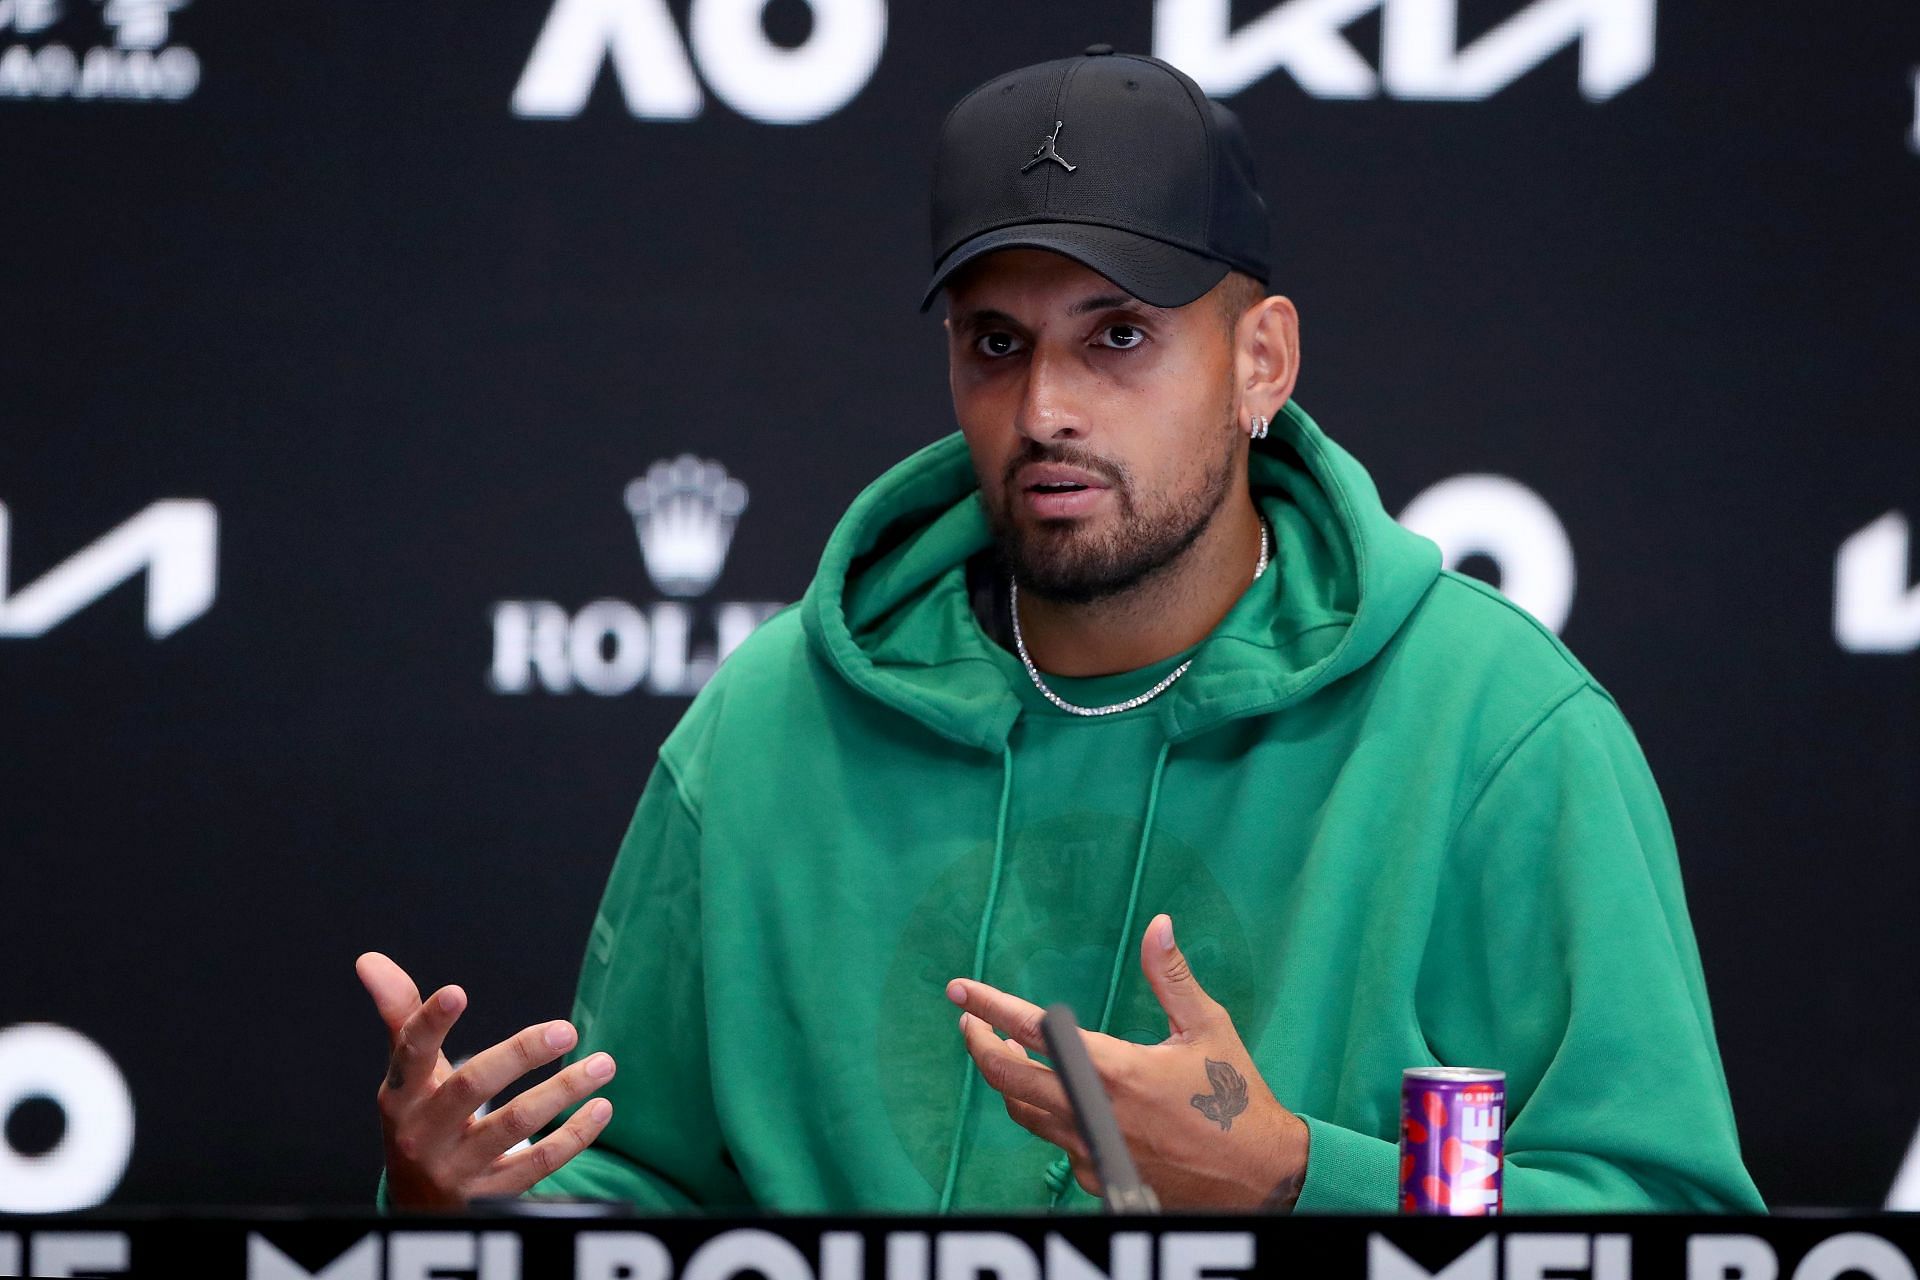 Kyrgios speaking to the press